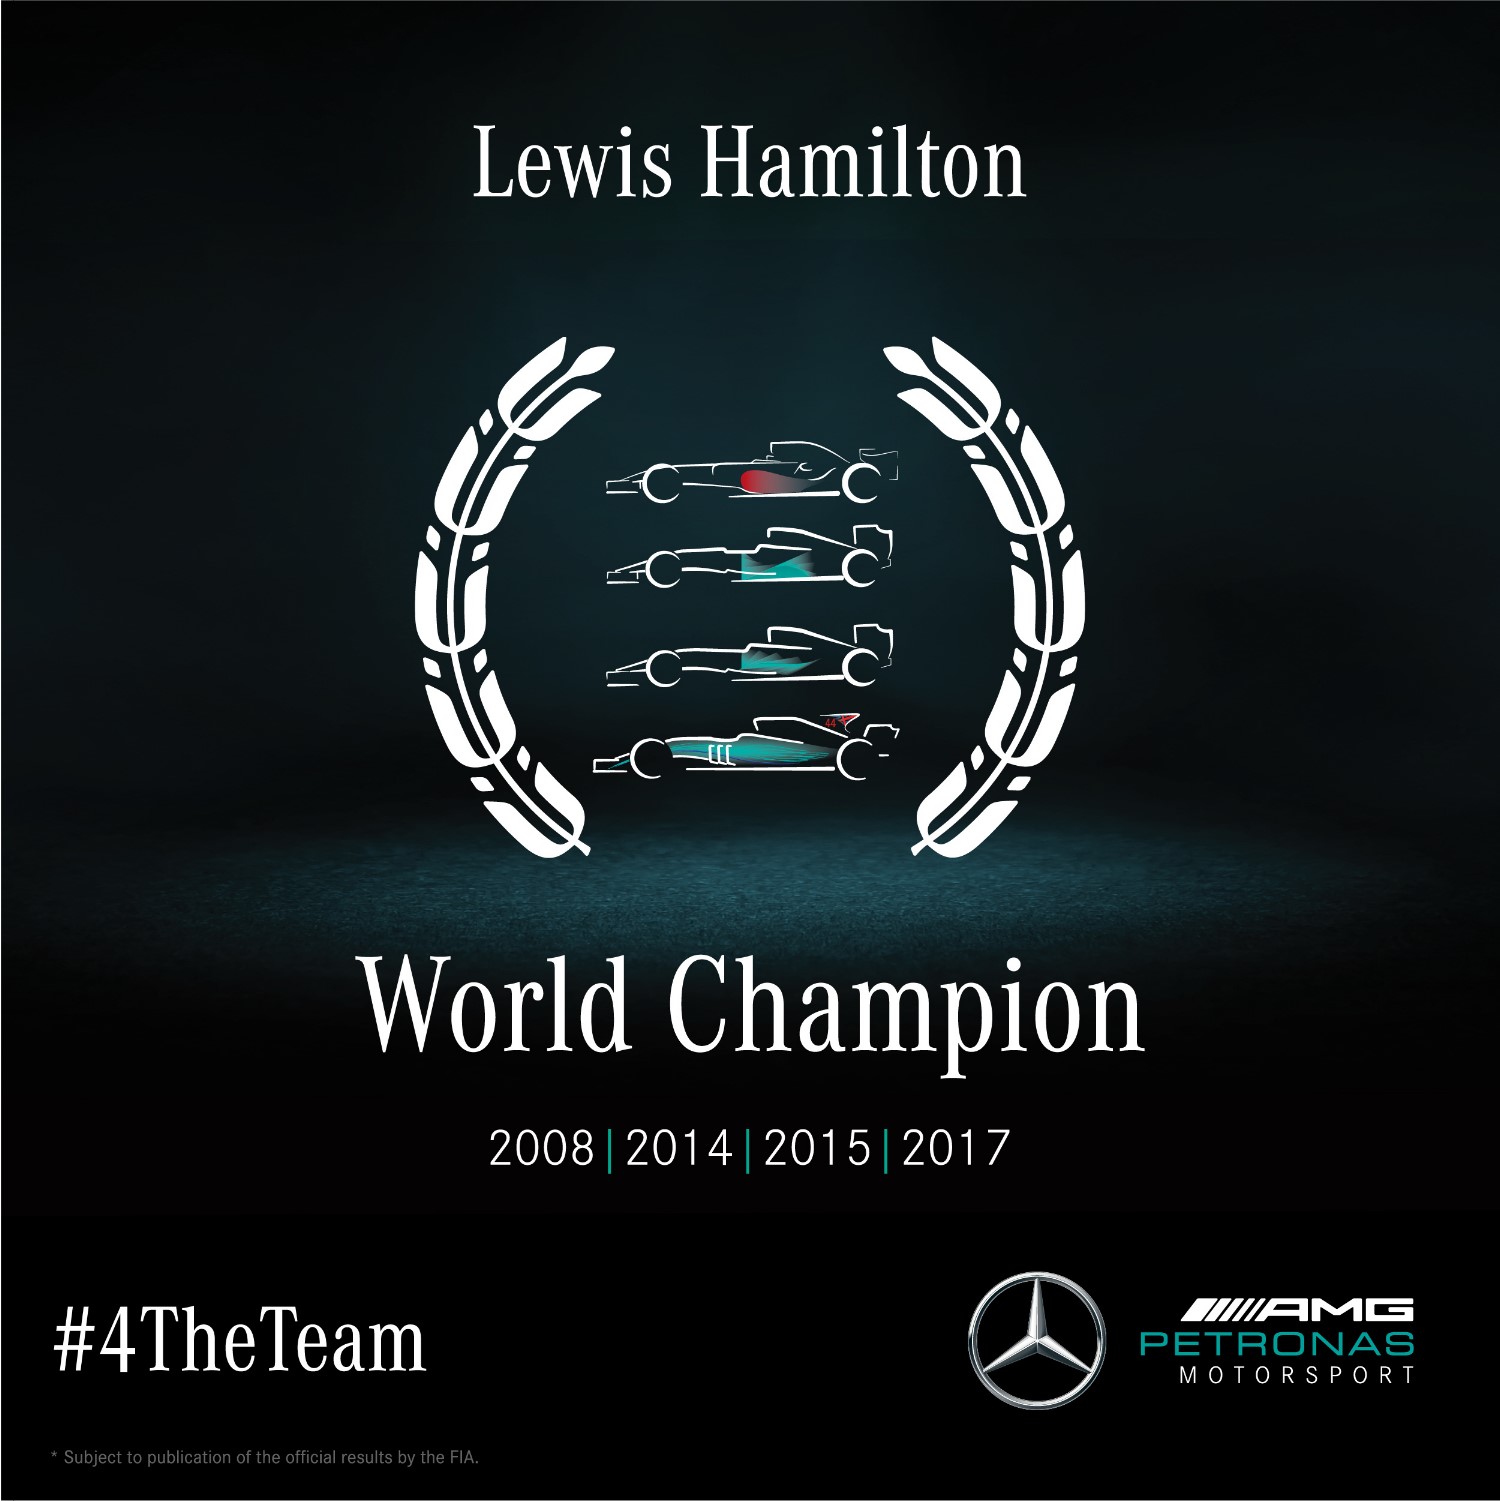 As long as Aldo Costa is still designing the Mercedes Hamilton will win many more poles, races and titles.